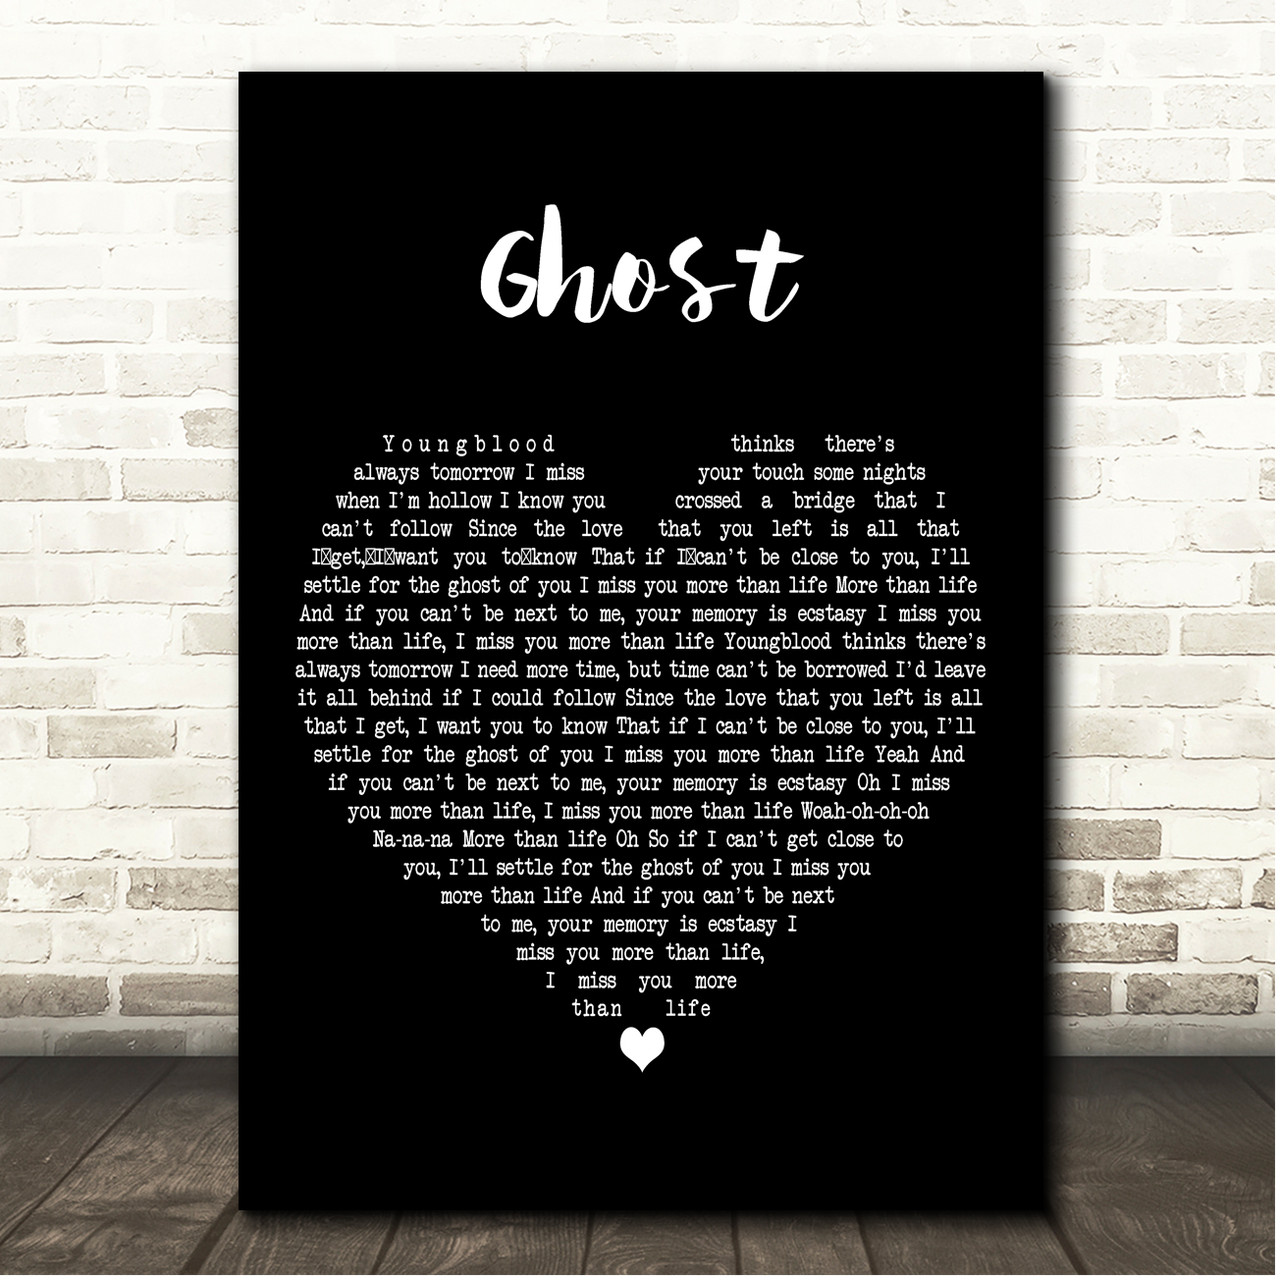 Ghost - song and lyrics by Justin Bieber